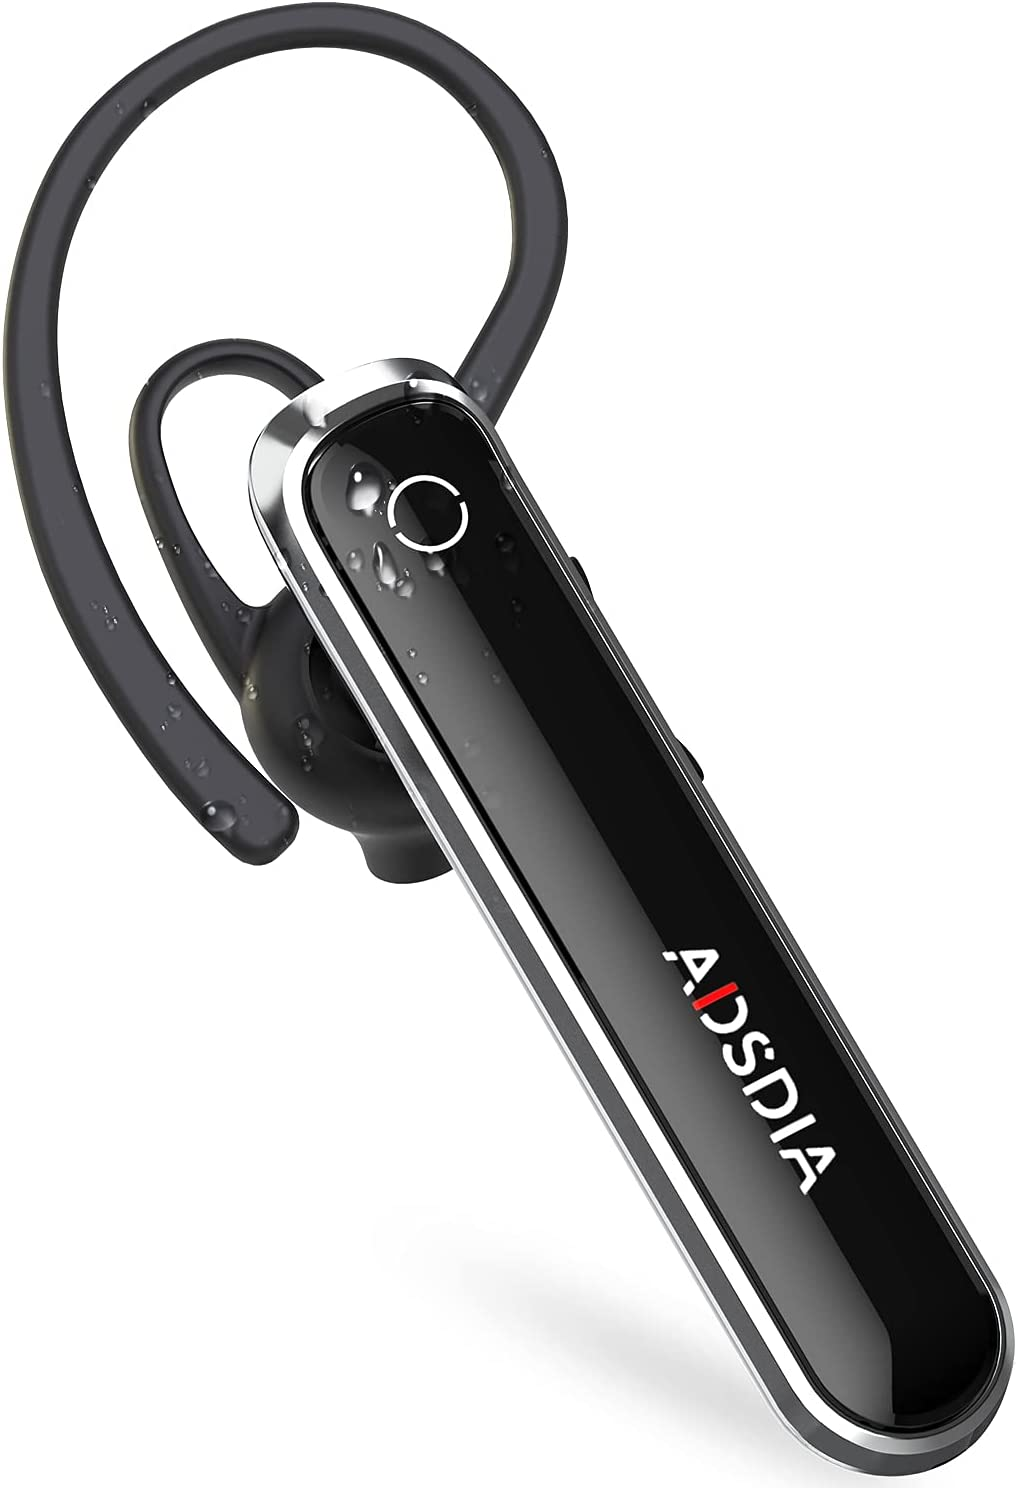 Bluetooth Earpiece V4.2 Built in Mic Wireless Headphones Handsfree Headset Noise Cancelling IPX5 Waterproof & Hands Free Calling Compatible with Ios Android Phone, ADSDIA Deep Bass for Sport Driving